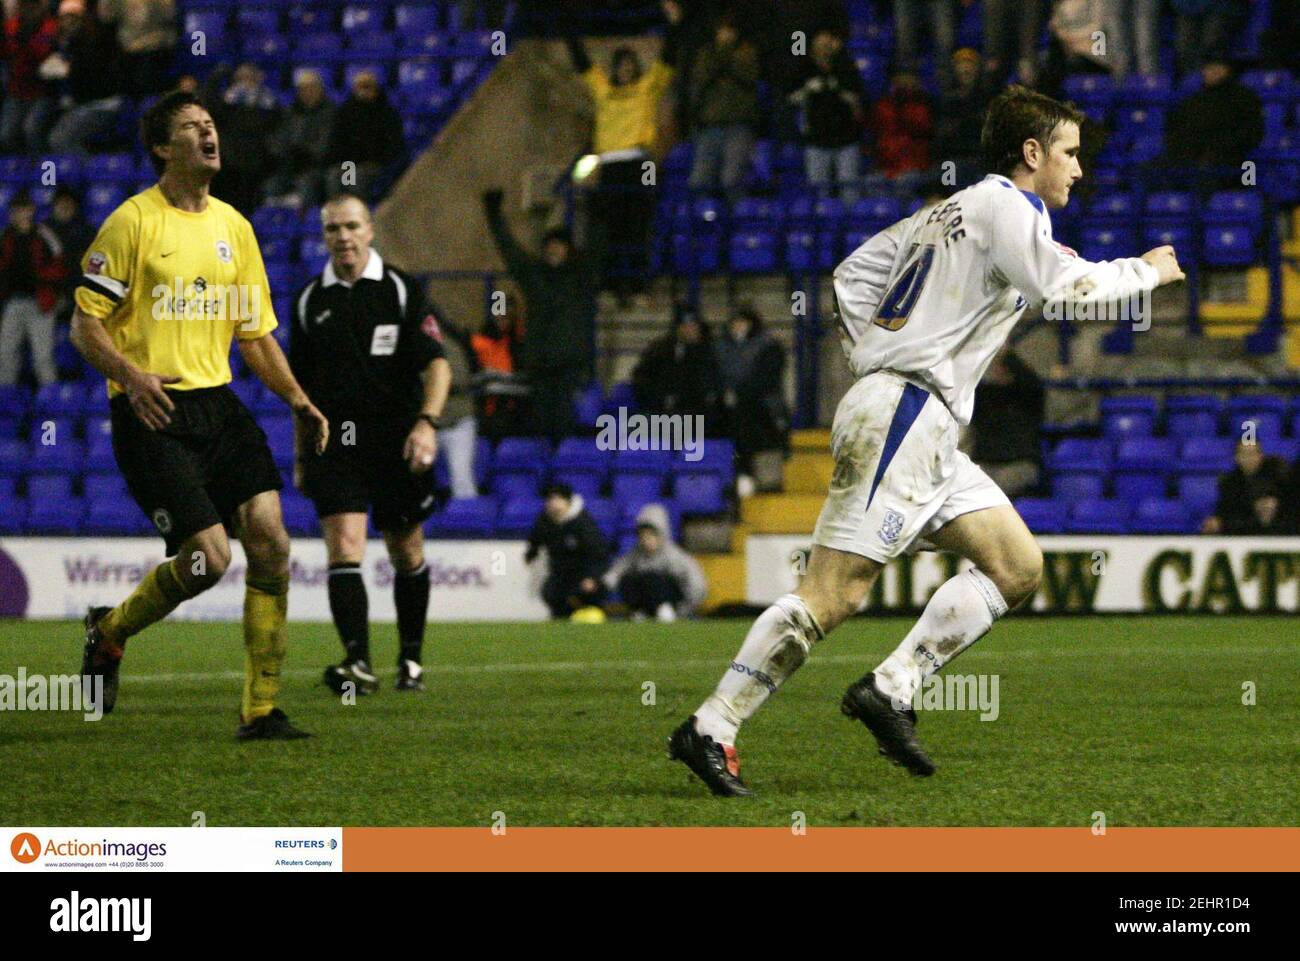 Football - Tranmere Rovers v Rochdale LDV Vans Trophy Northern Section  Second Round - Prenton Park - 22/11/05 Chris Greenacre celebrates scoring  the third goal from the penalty spot for Tranmere Mandatory